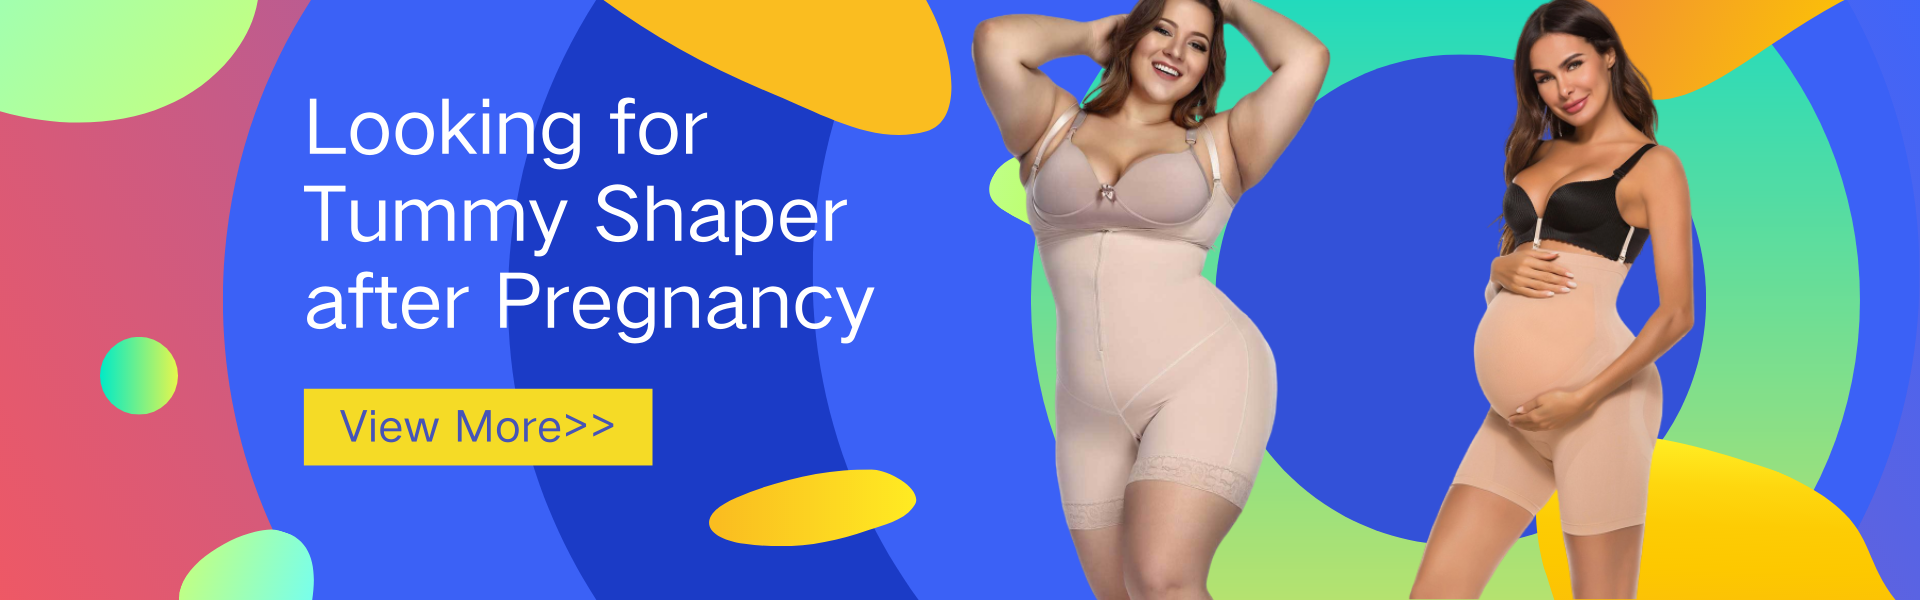 Looking for Tummy Shaper after Pregnancy